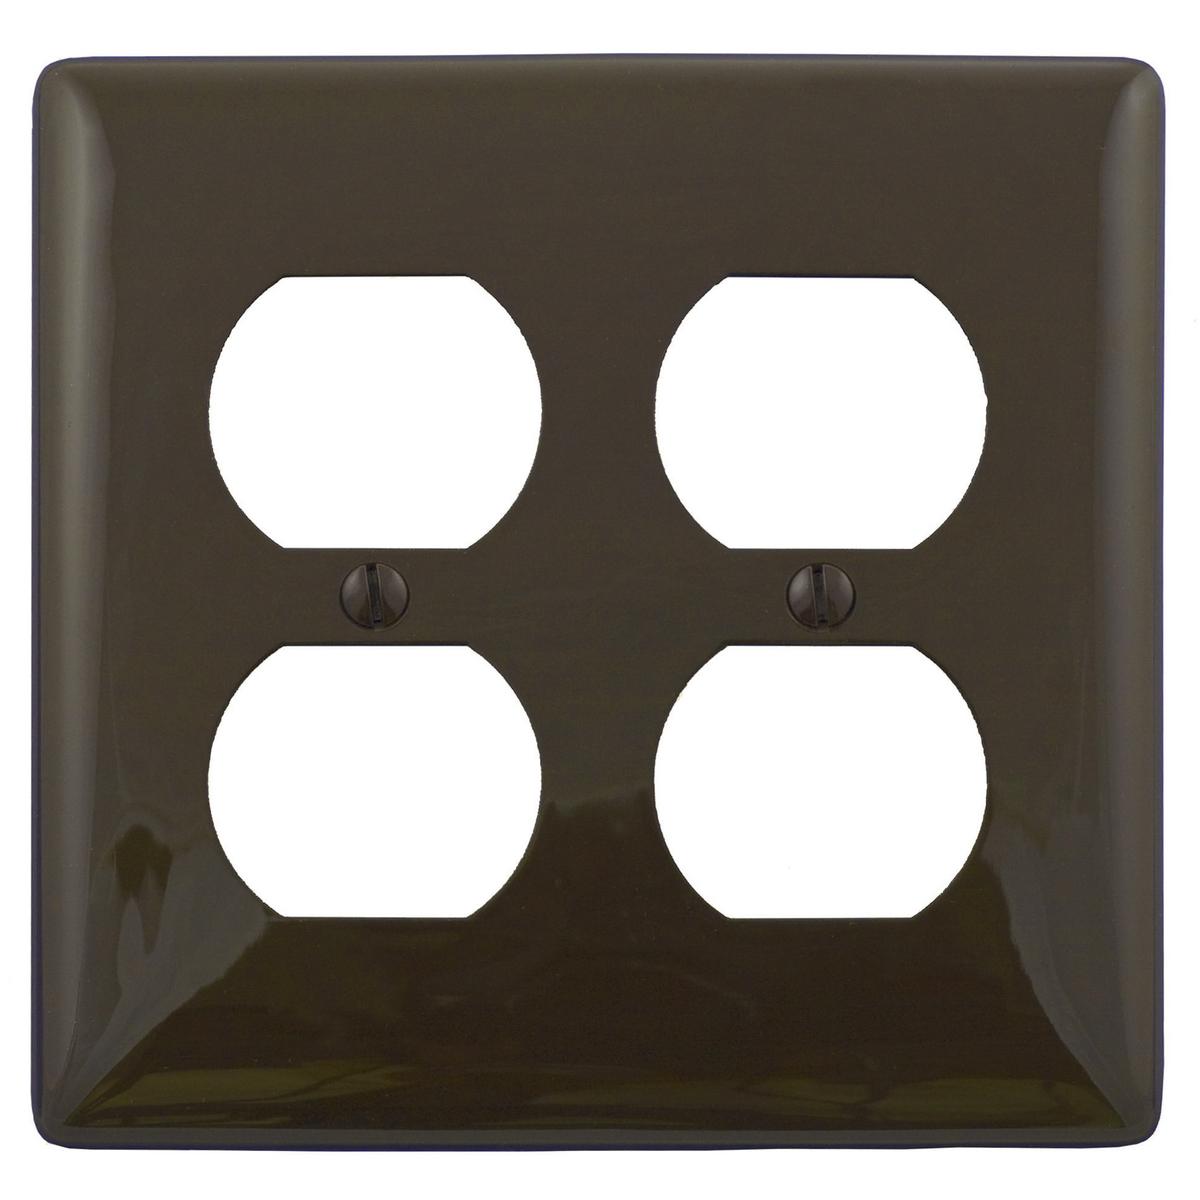 Hubbell NP82 Wallplates and Box Covers, Wallplate, Nylon, 2-Gang, 2) Duplex, Brown  ; Reinforcement ribs for extra strength ; Captive screw feature holds mounting screw in place ; High-impact, self-extinguishing nylon material ; Standard Size is 1/8" larger to give yo